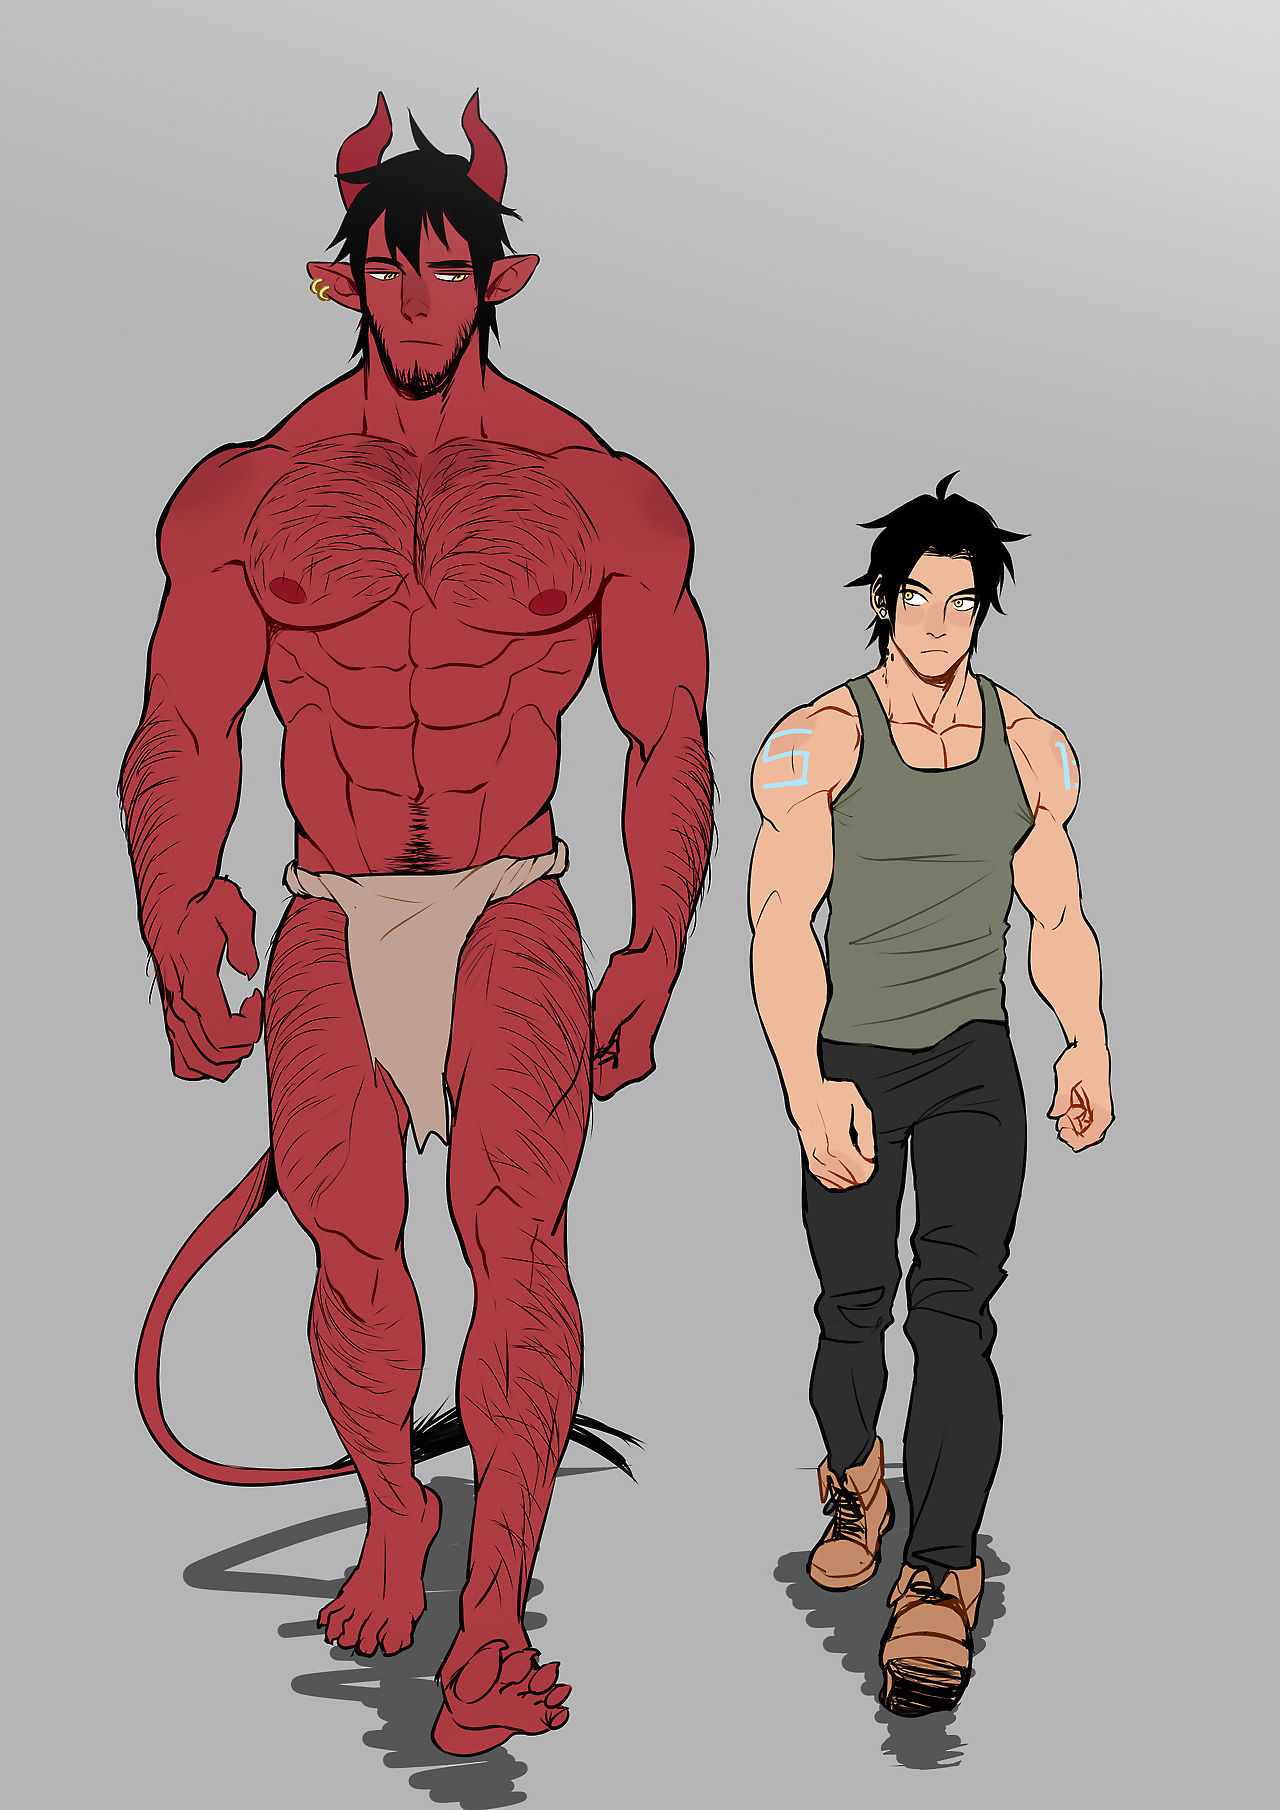 The Devil and S-13